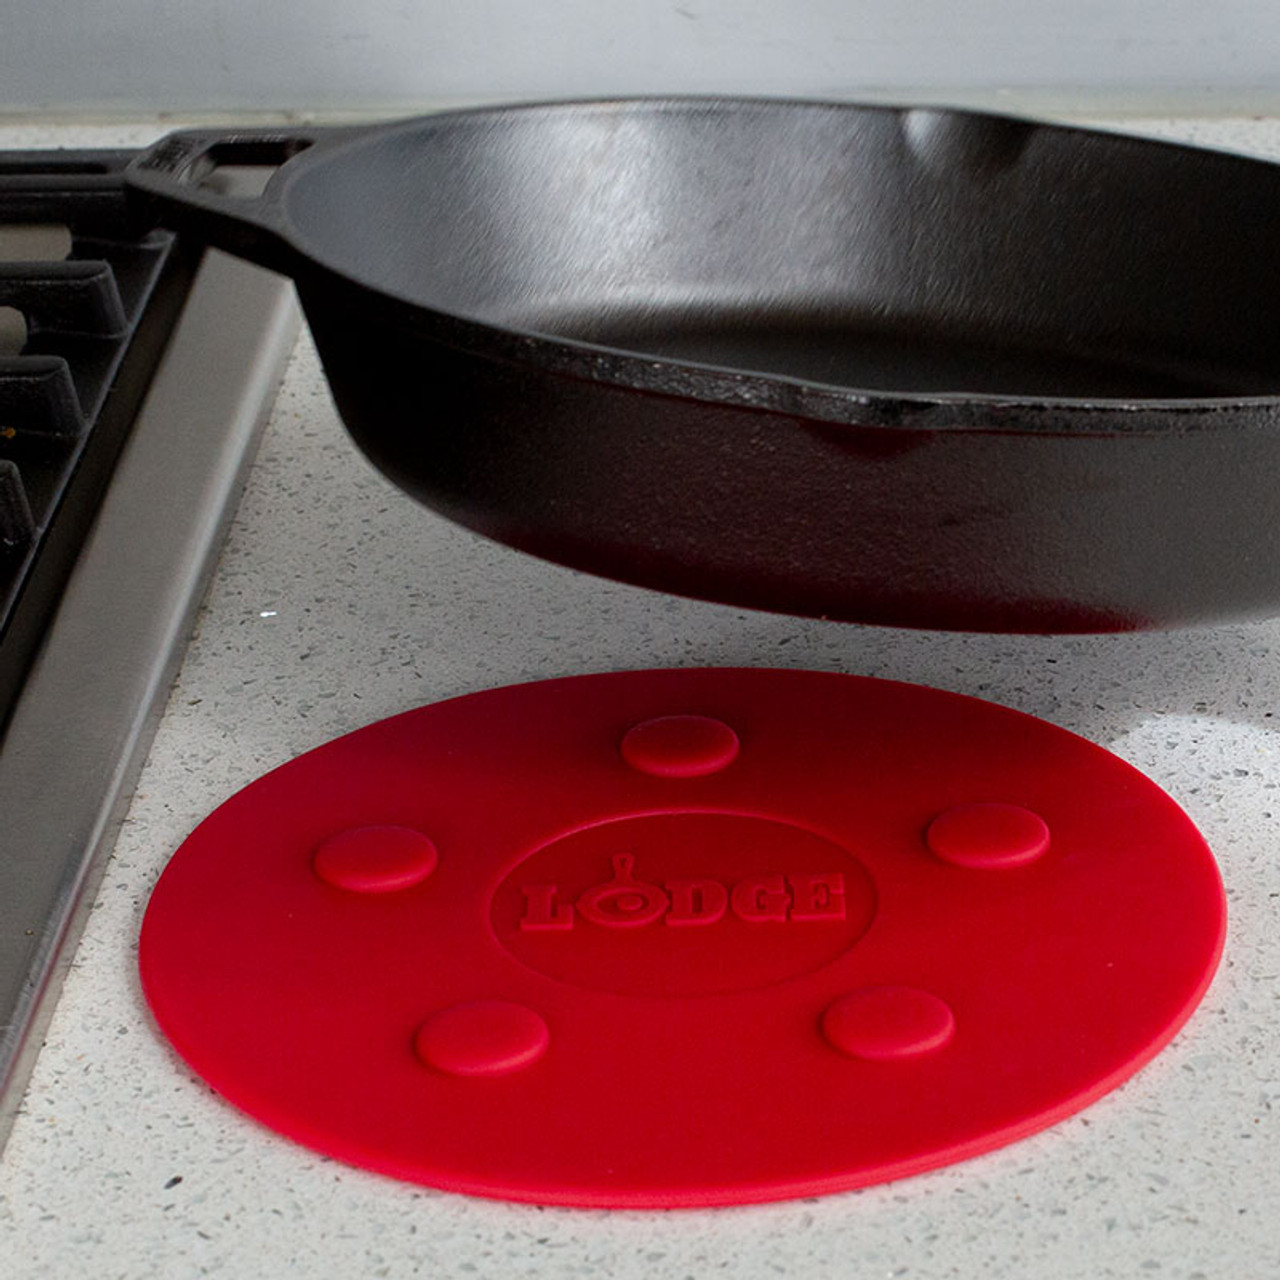 Lodge 8" Large Red Silicone Magnetic Trivet